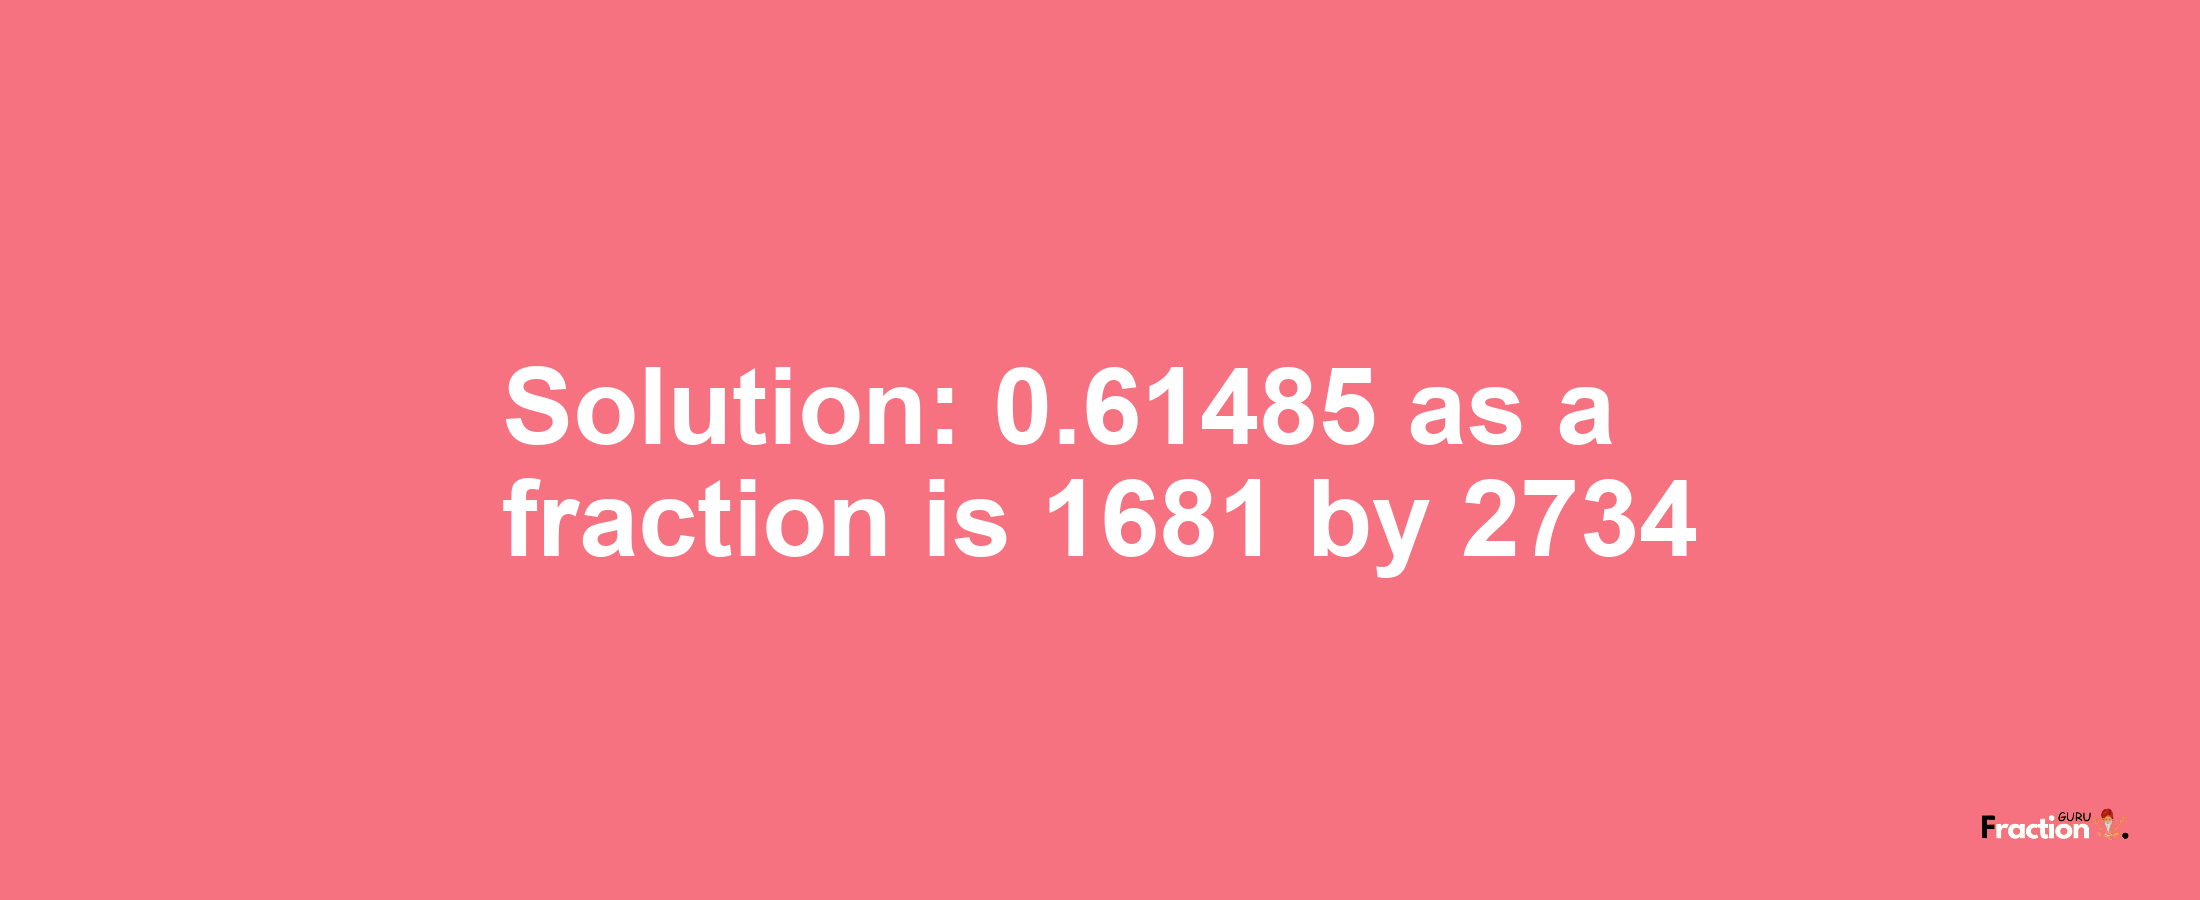 Solution:0.61485 as a fraction is 1681/2734